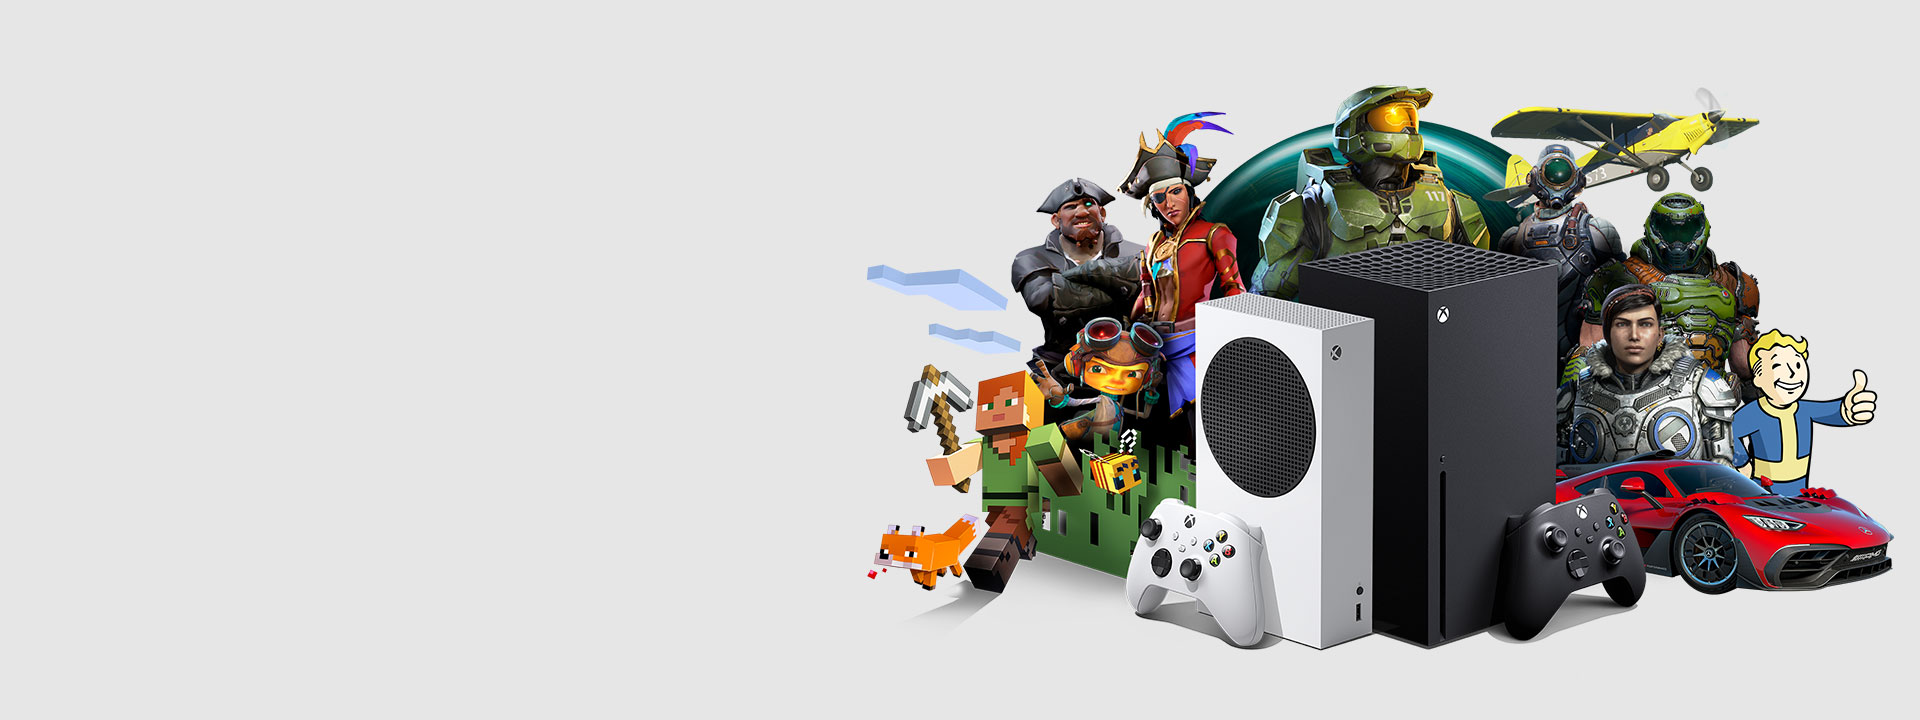 Xbox game characters surrounding Xbox Series X and S with controllers